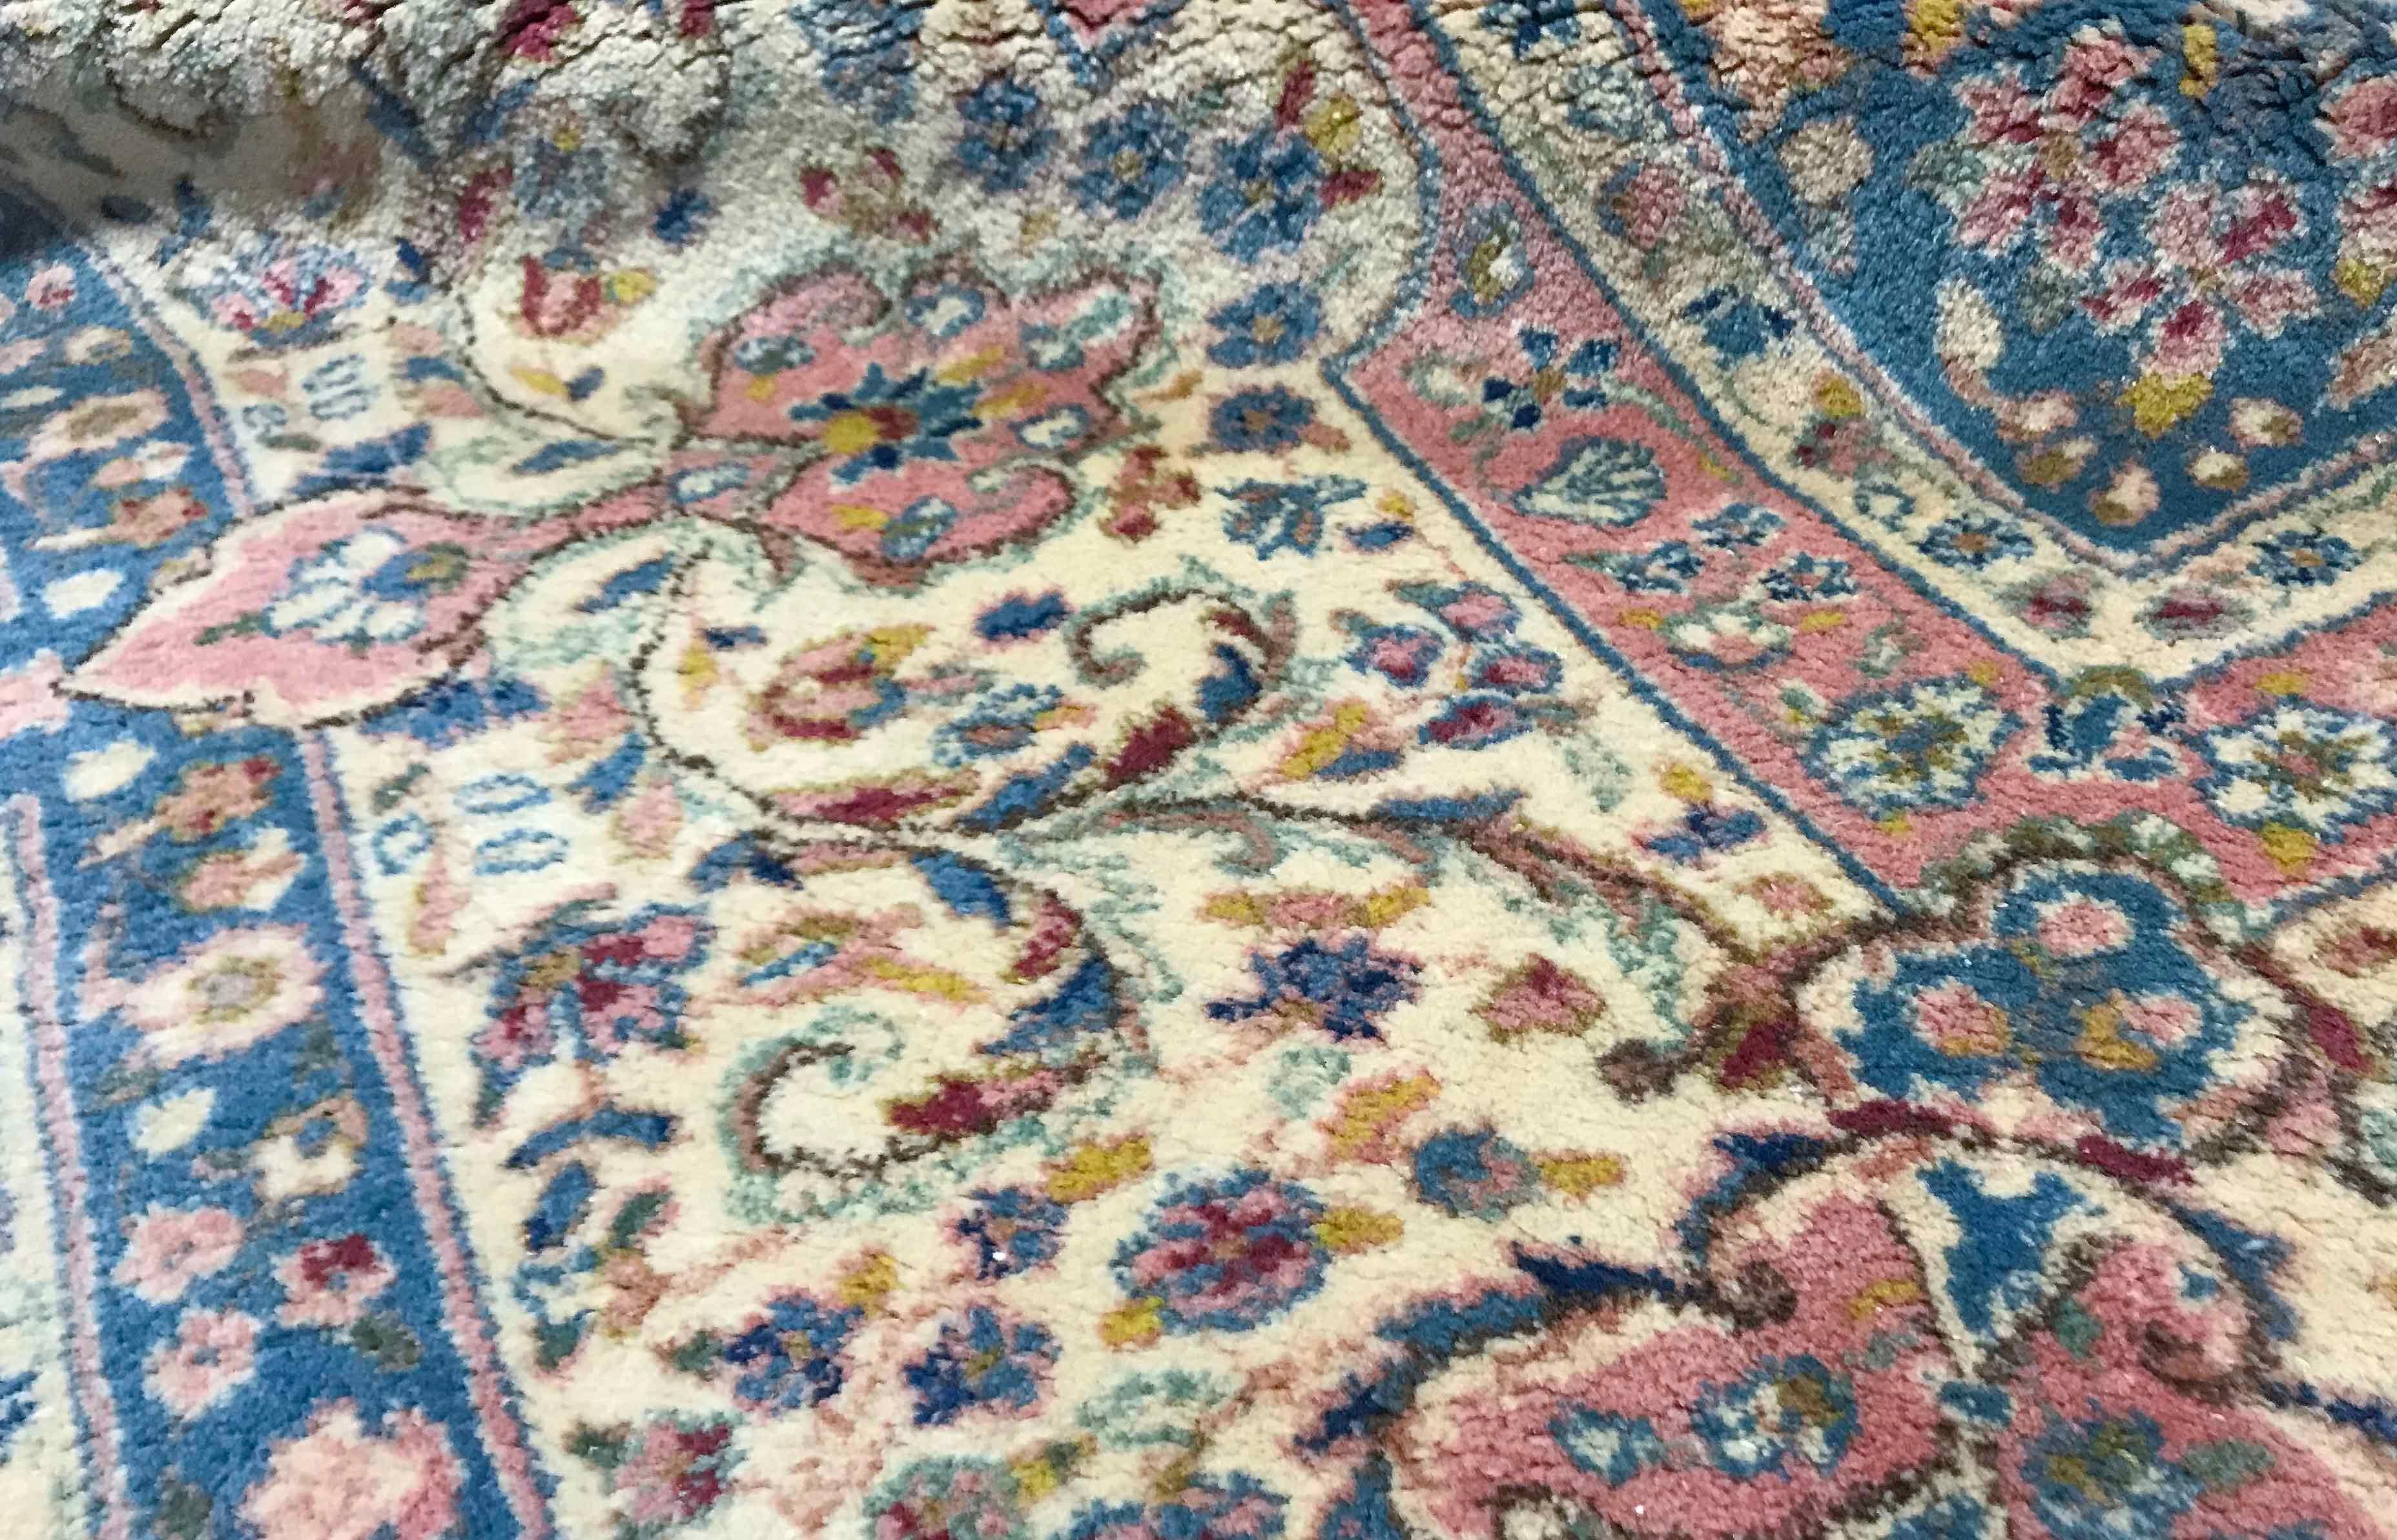 Vintage oversize Persian Kirman Rose / Ivory rug, circa 1940. A rare size for this dramatic Kerman rug the central motif replicated in the borders with a soft powder blue and floral elements is sitting on a deep rose red to create this powerful